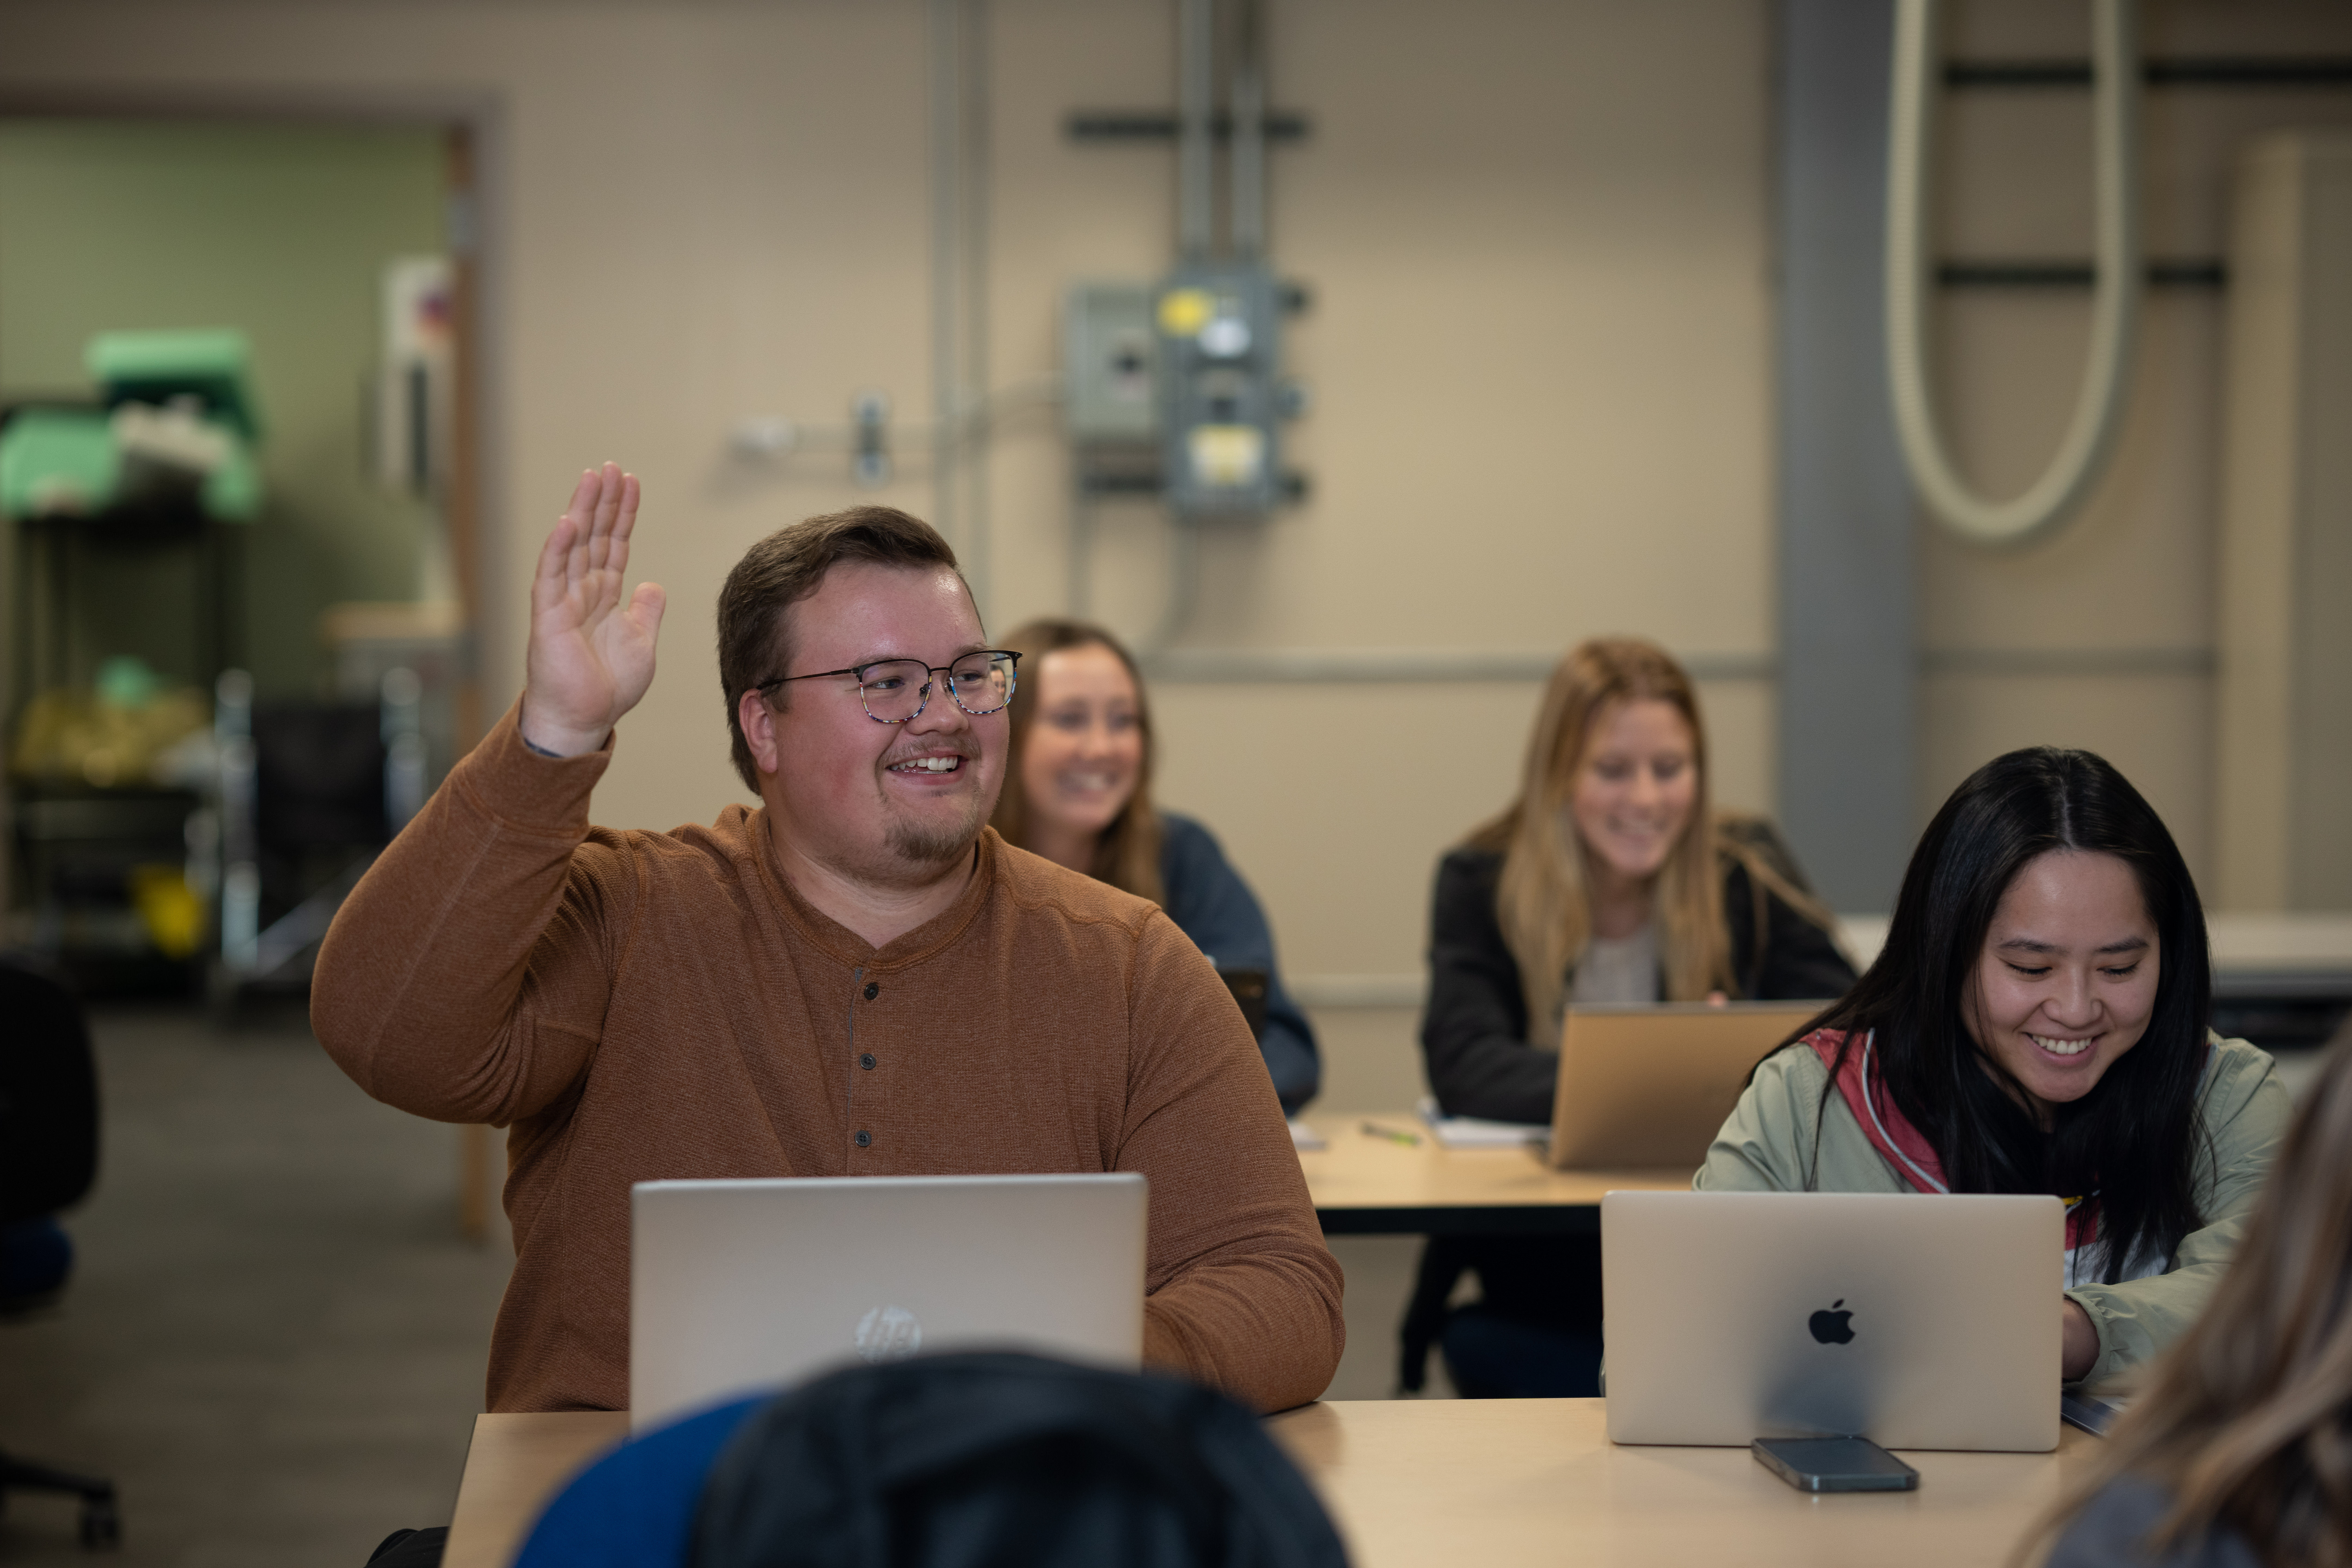 Student raising his hand in a DL classroom